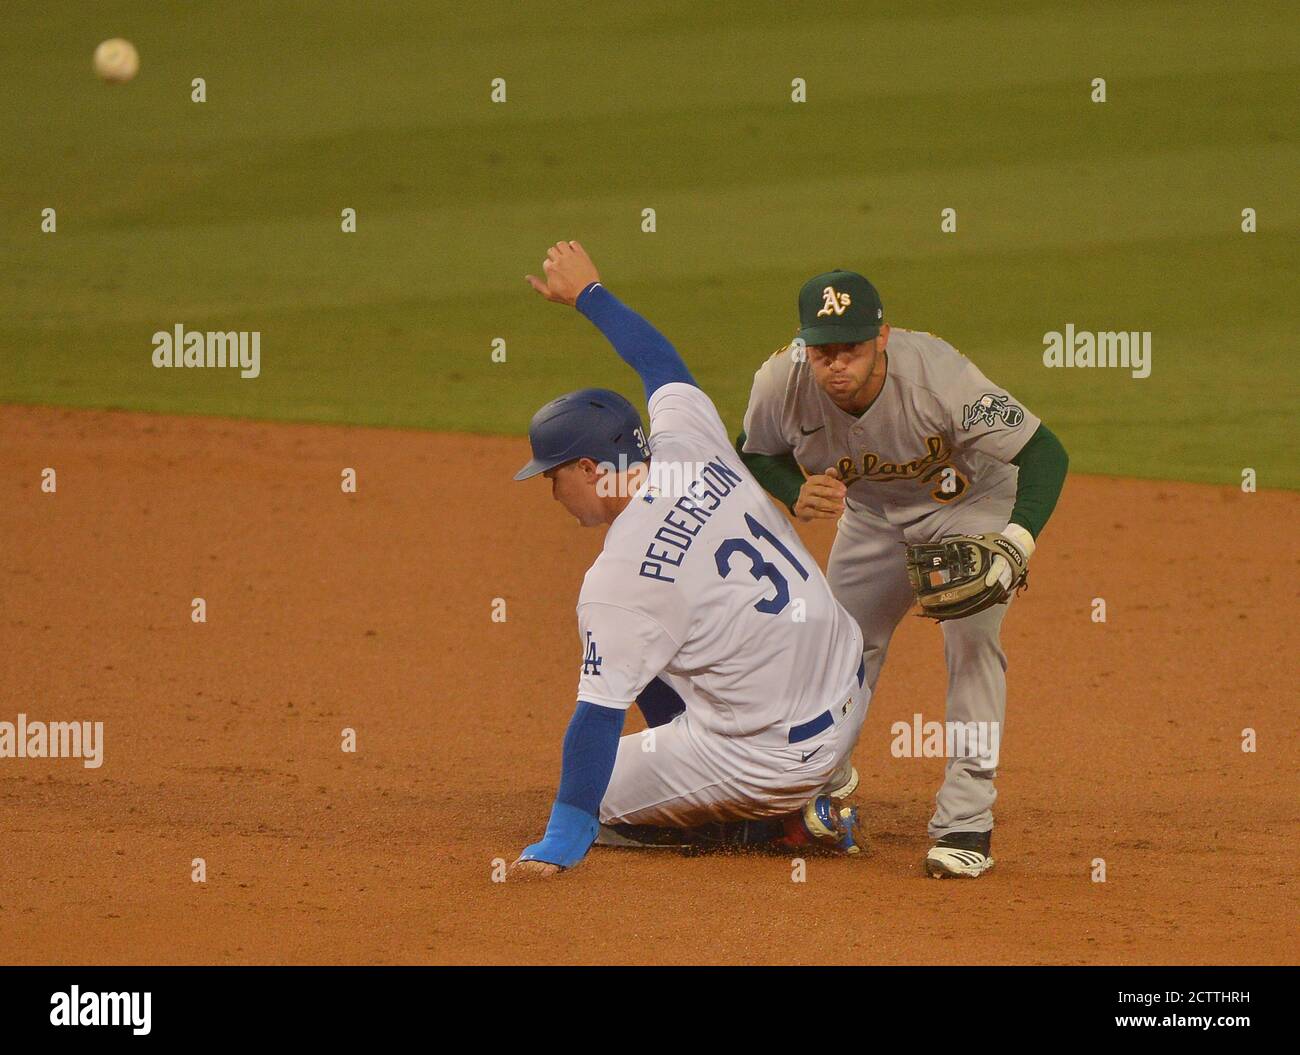 Los Angeles, United States. 24th Sep, 2020. Los Angeles Dodgers' Joc Pederson breaks up the double play by second baseman Tommy La Stella in the second inning at Dodger Stadium in Los Angeles on Thursday, September 24, 2020. Photo by Jim Ruymen/UPI Credit: UPI/Alamy Live News Stock Photo